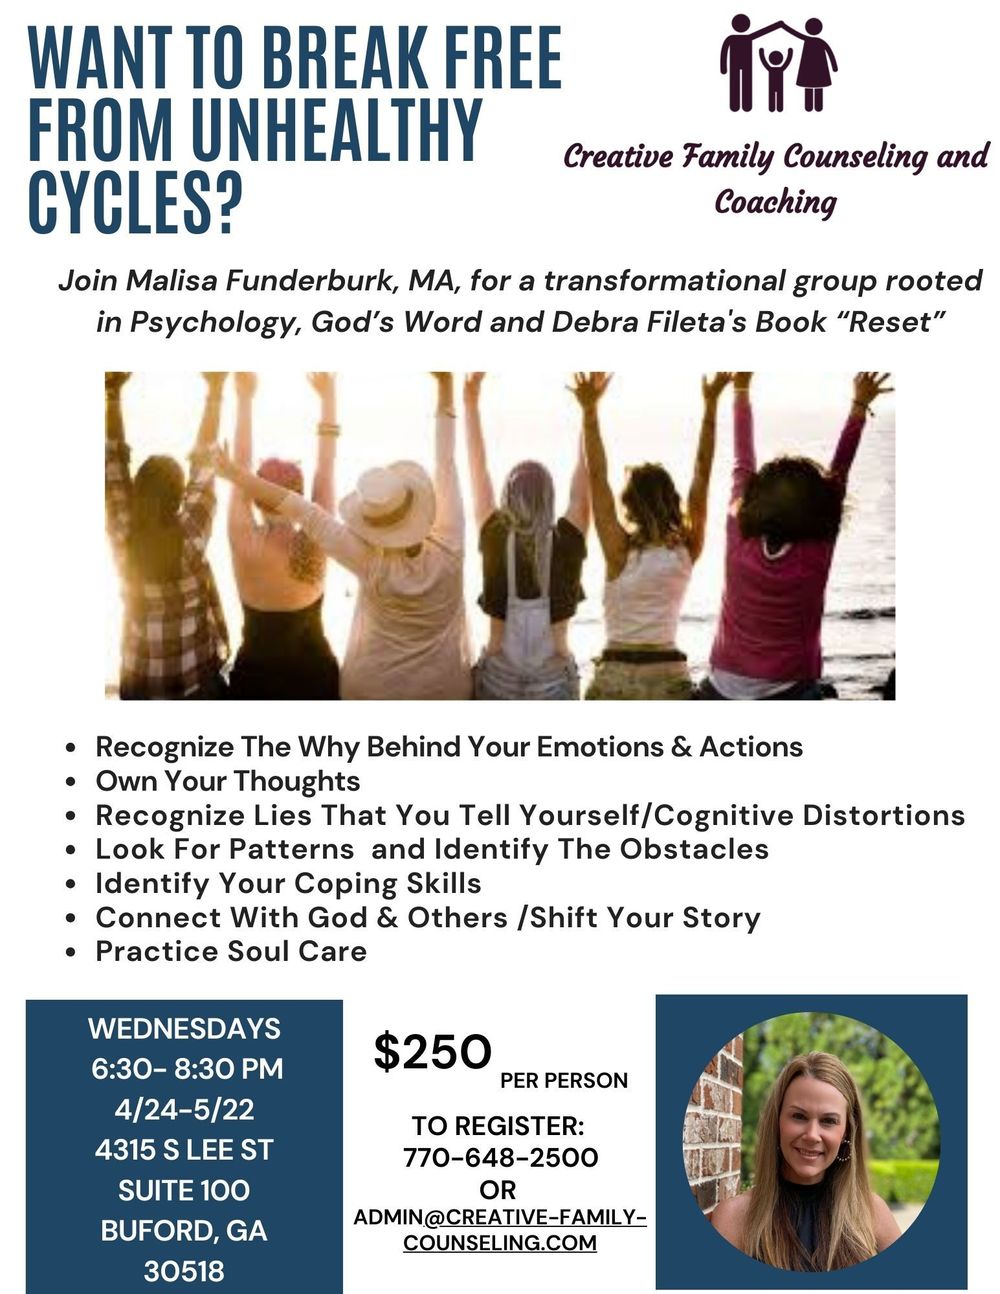 Please come join me for this transformational group!